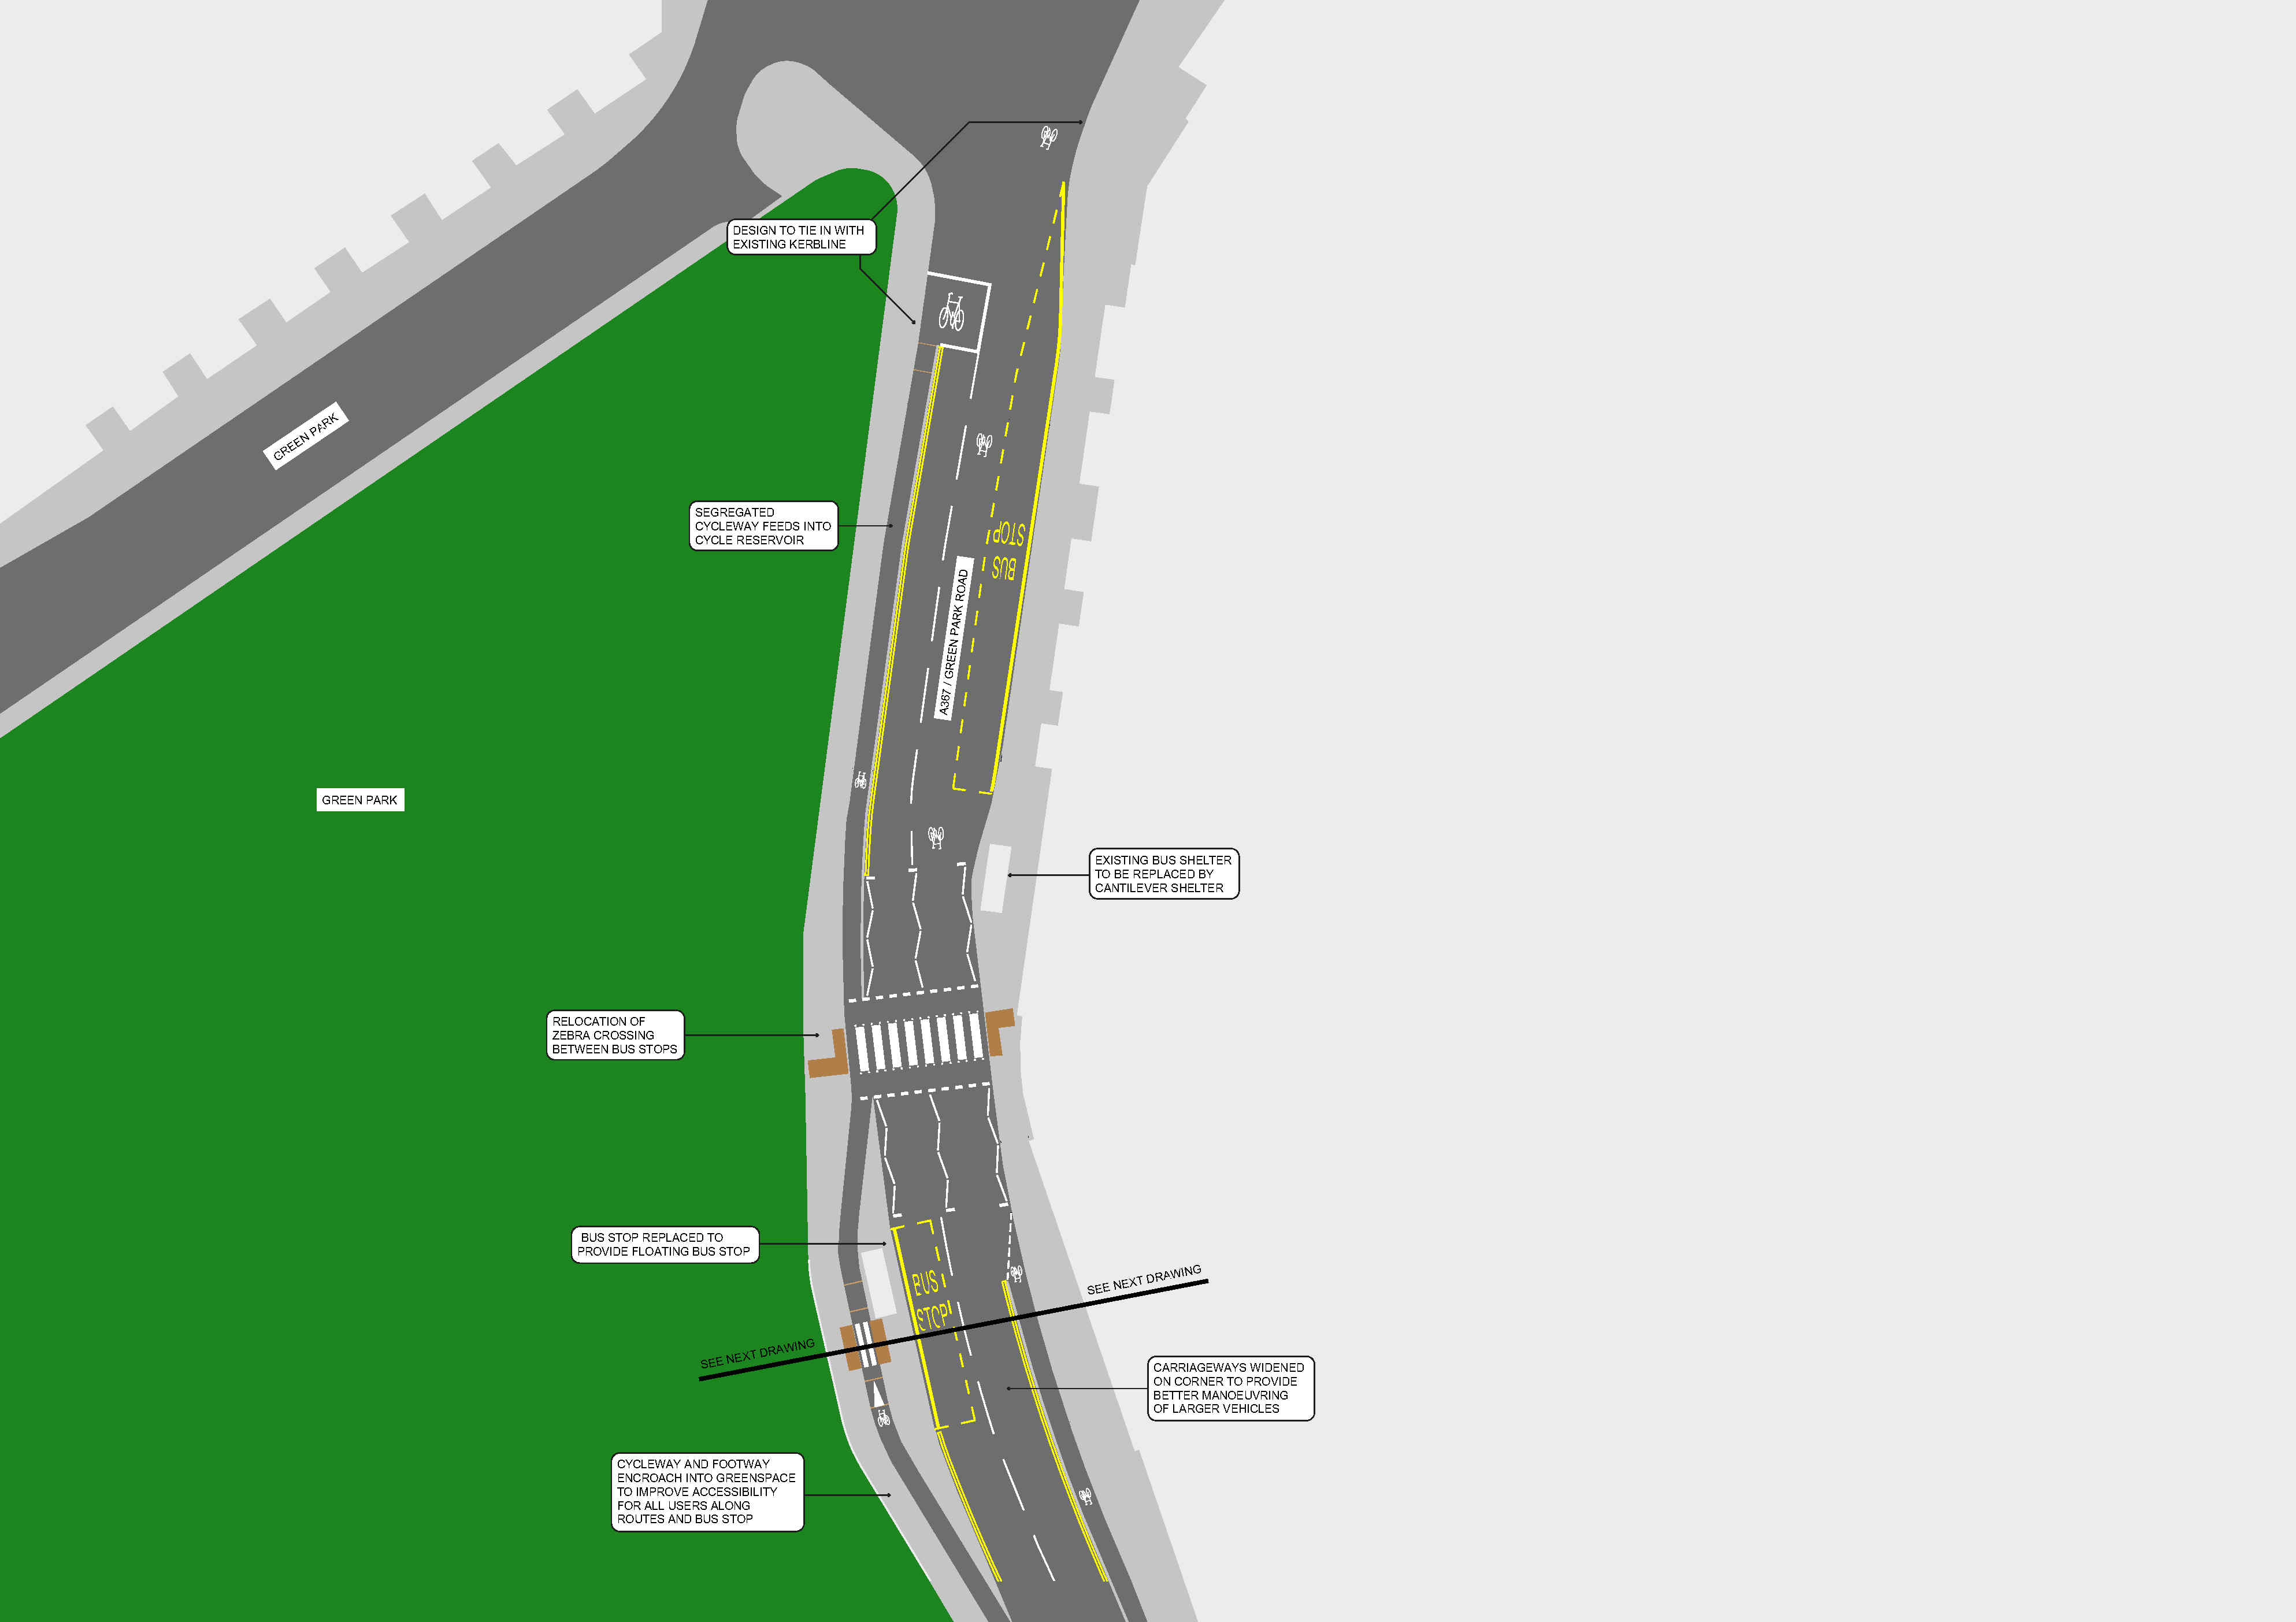 Map of section 1 of the proposed improvements to Green Park Road as part of the Bath Quays Links project.